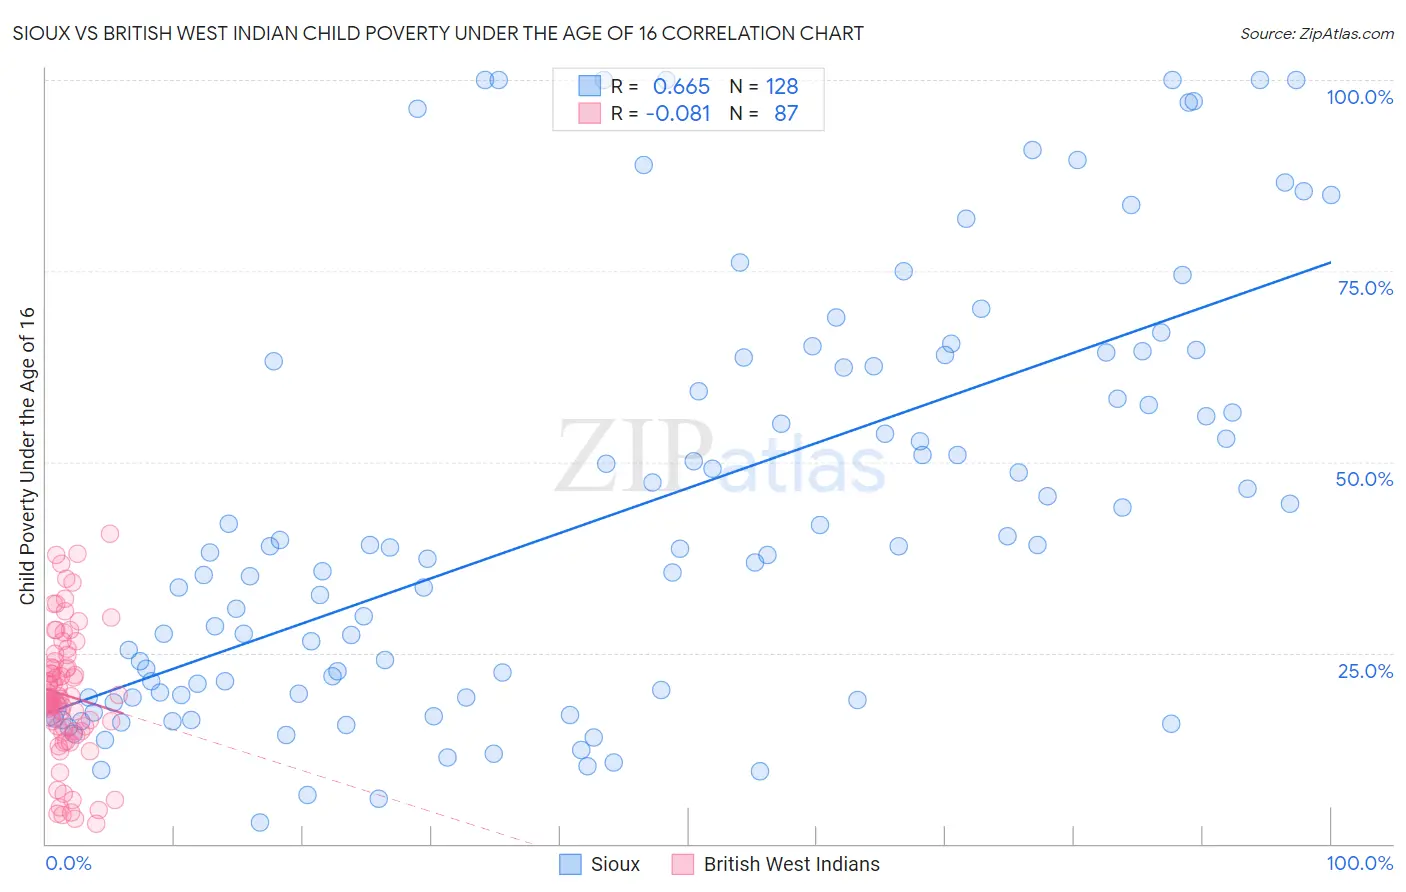 Sioux vs British West Indian Child Poverty Under the Age of 16